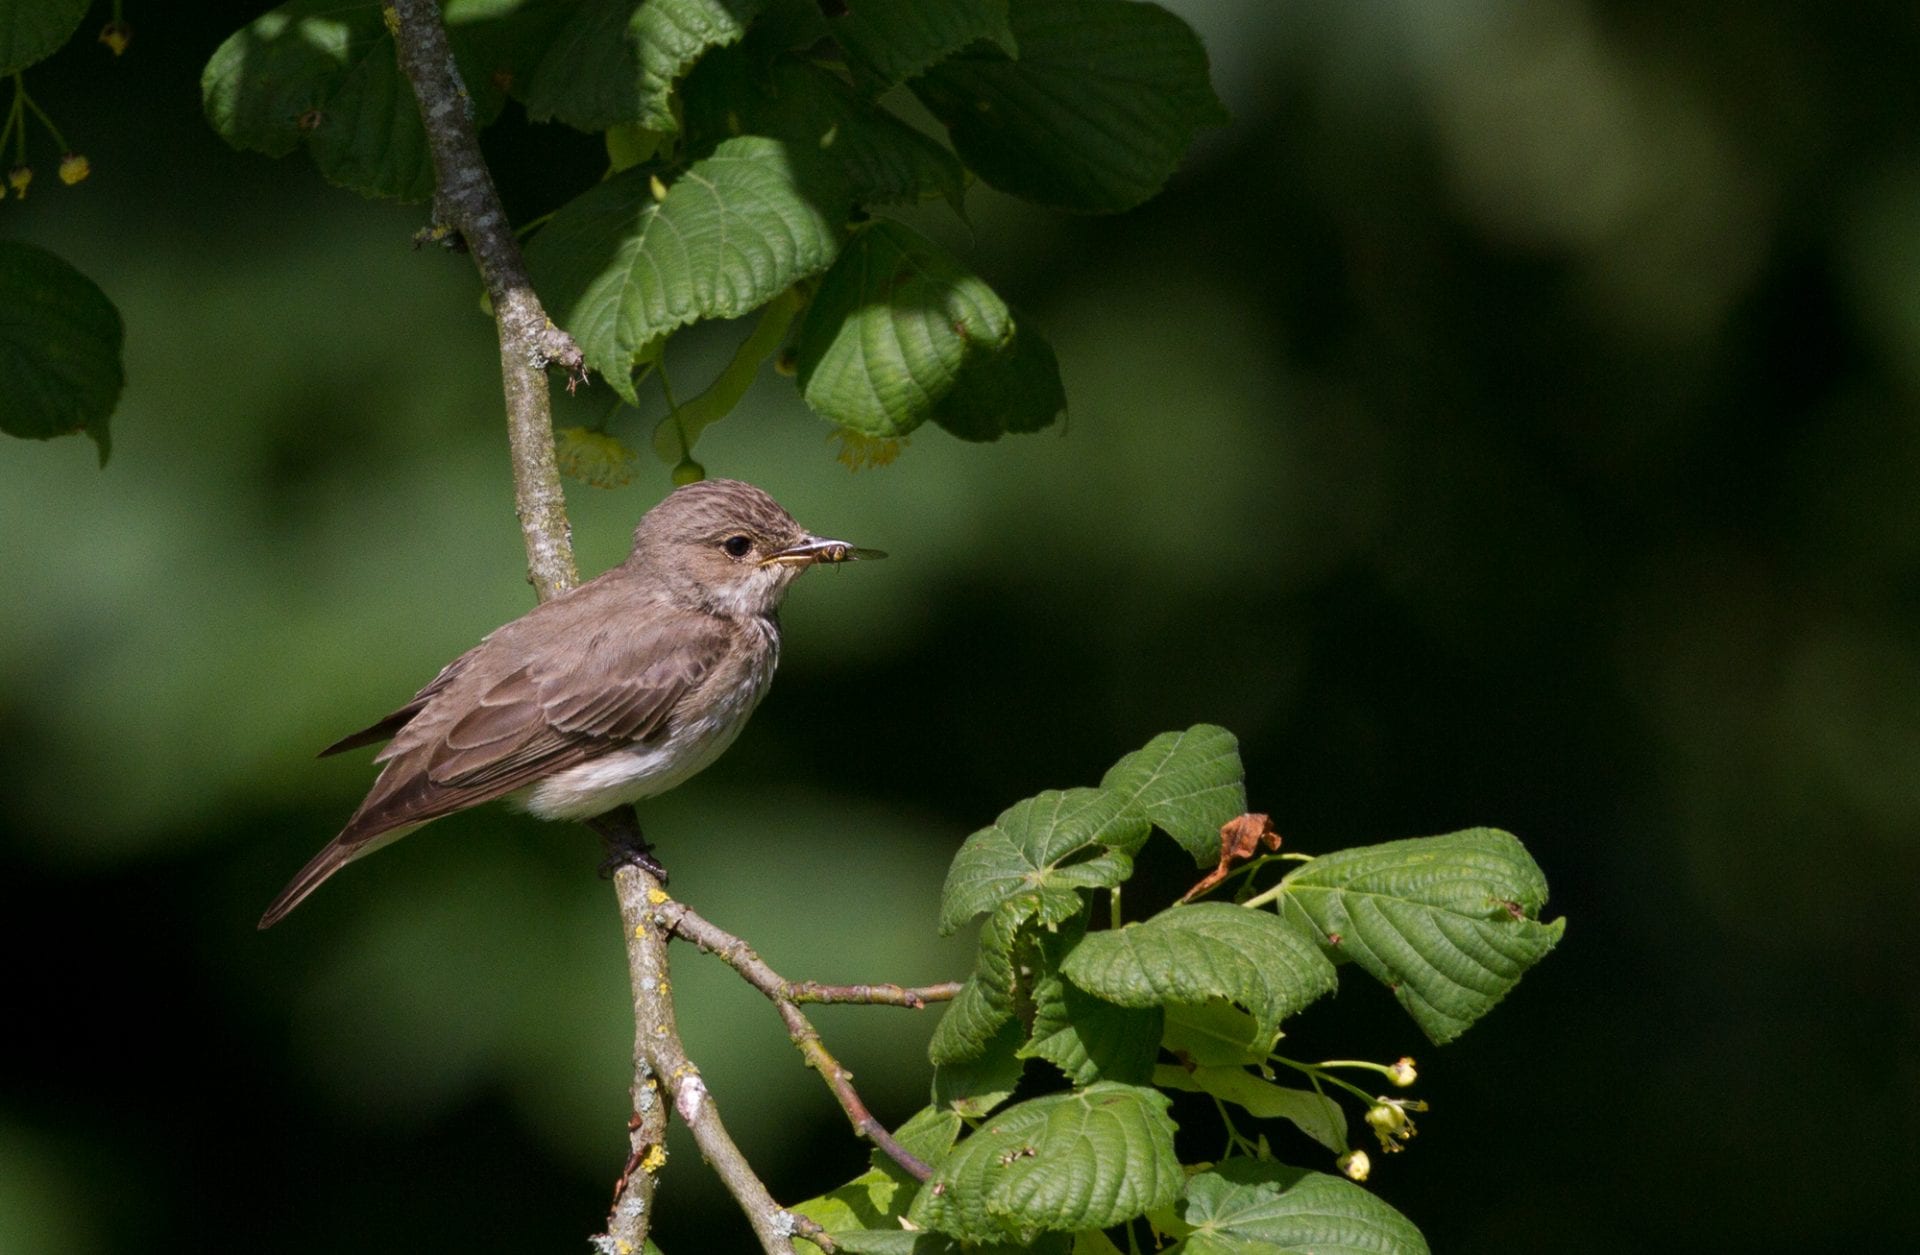 spotted-flycatcher-perched-on-branch-with-insect-prey-in-beak